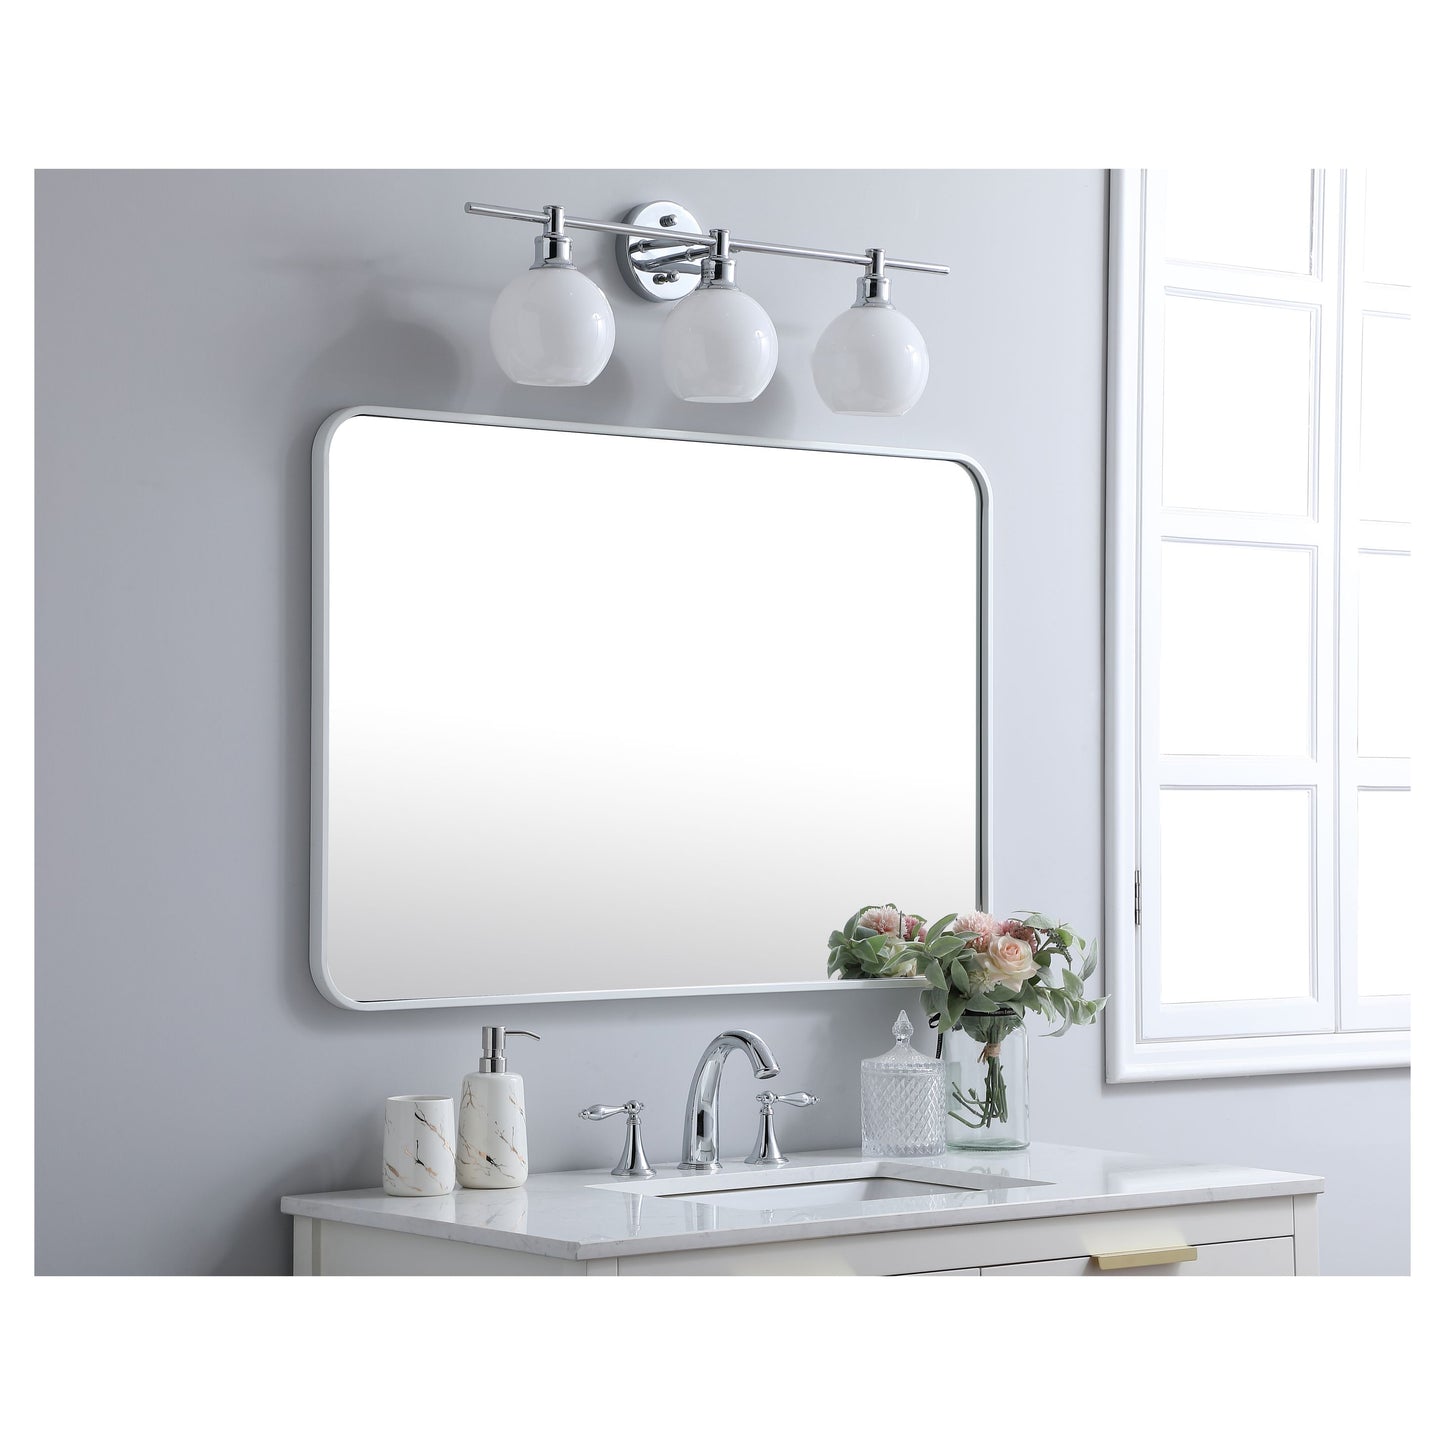 MR802740WH Evermore 27" x 40" Metal Framed Rectangular Mirror in White